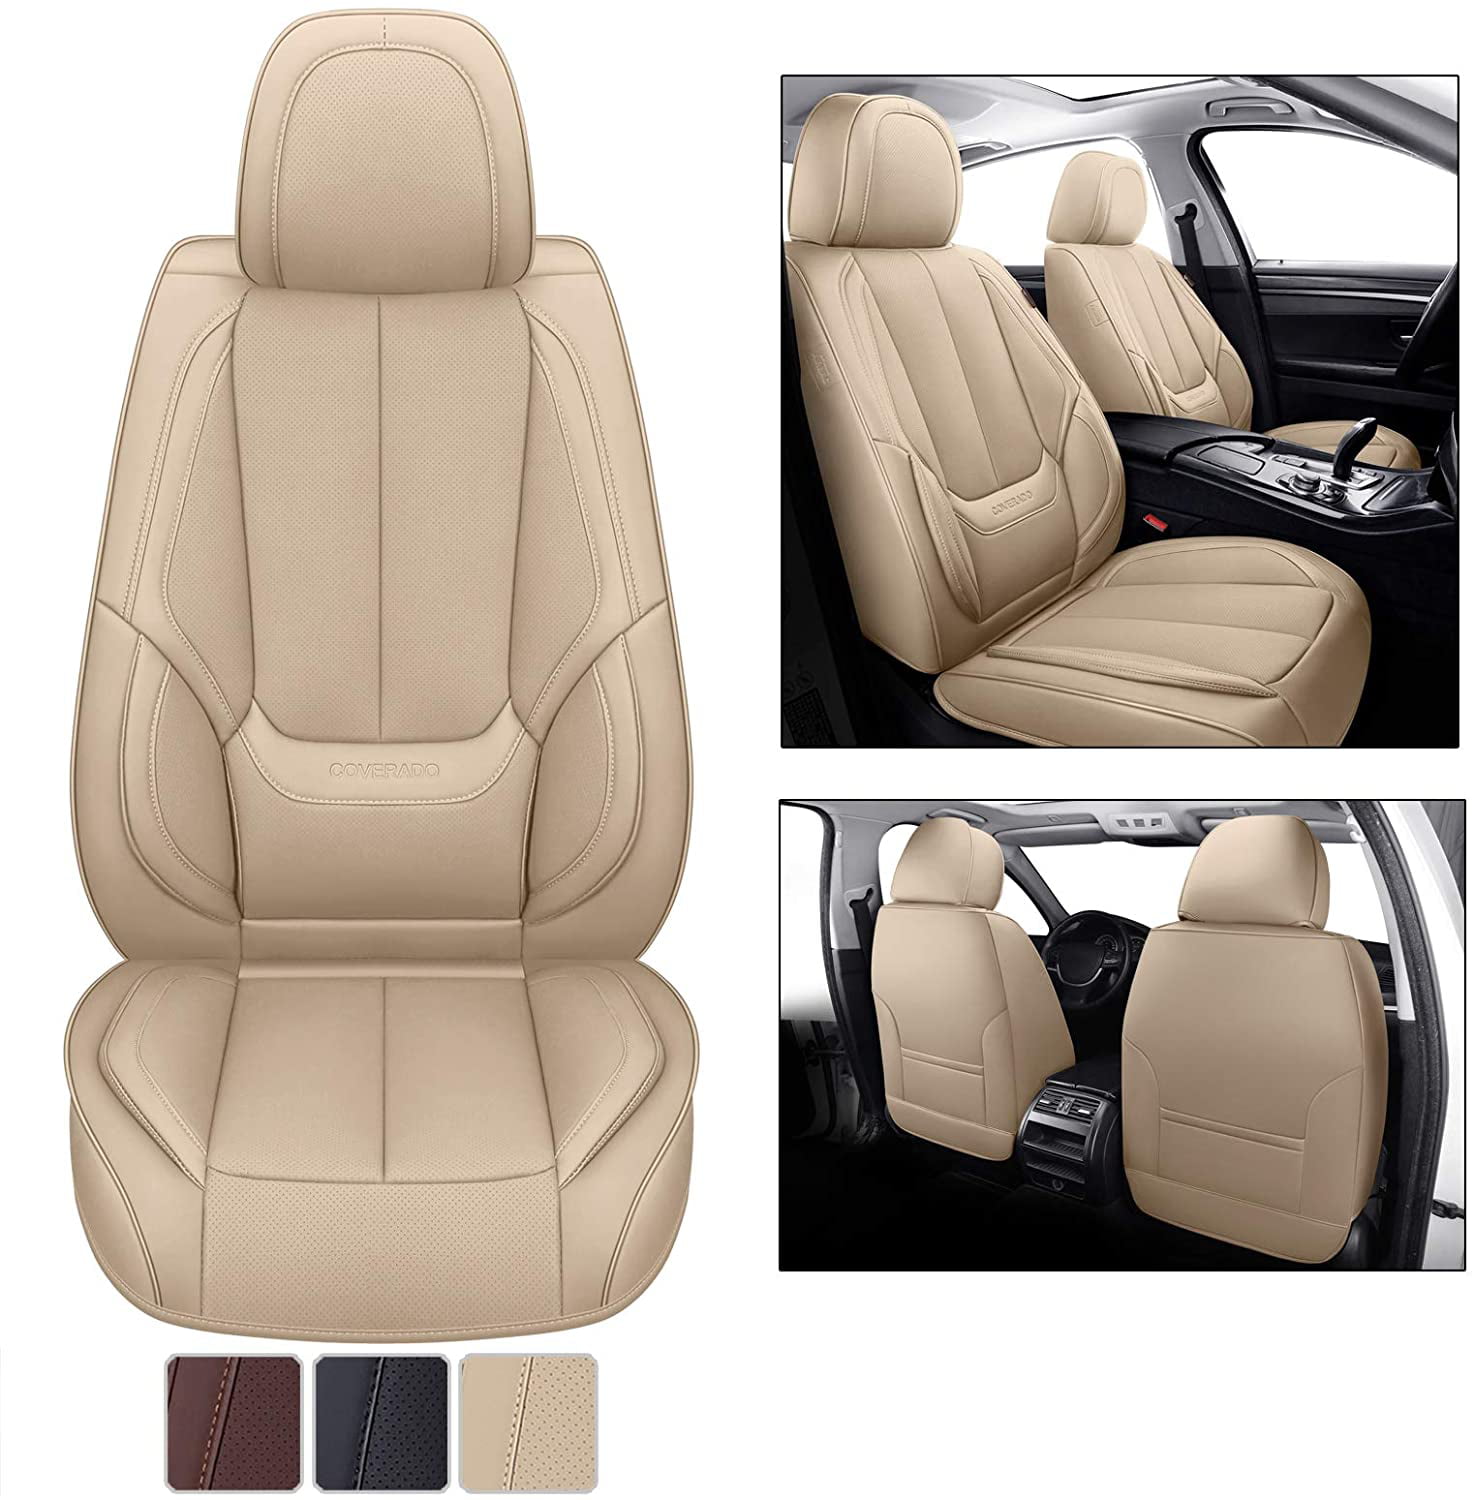 Universal Auto Protectors Fit for Most Sedans SUV Pick-up Truck Waterproof Nappa Leather Car Seat Covers with Head Pillow Beige Coverado Universal Seat Covers Full Set 